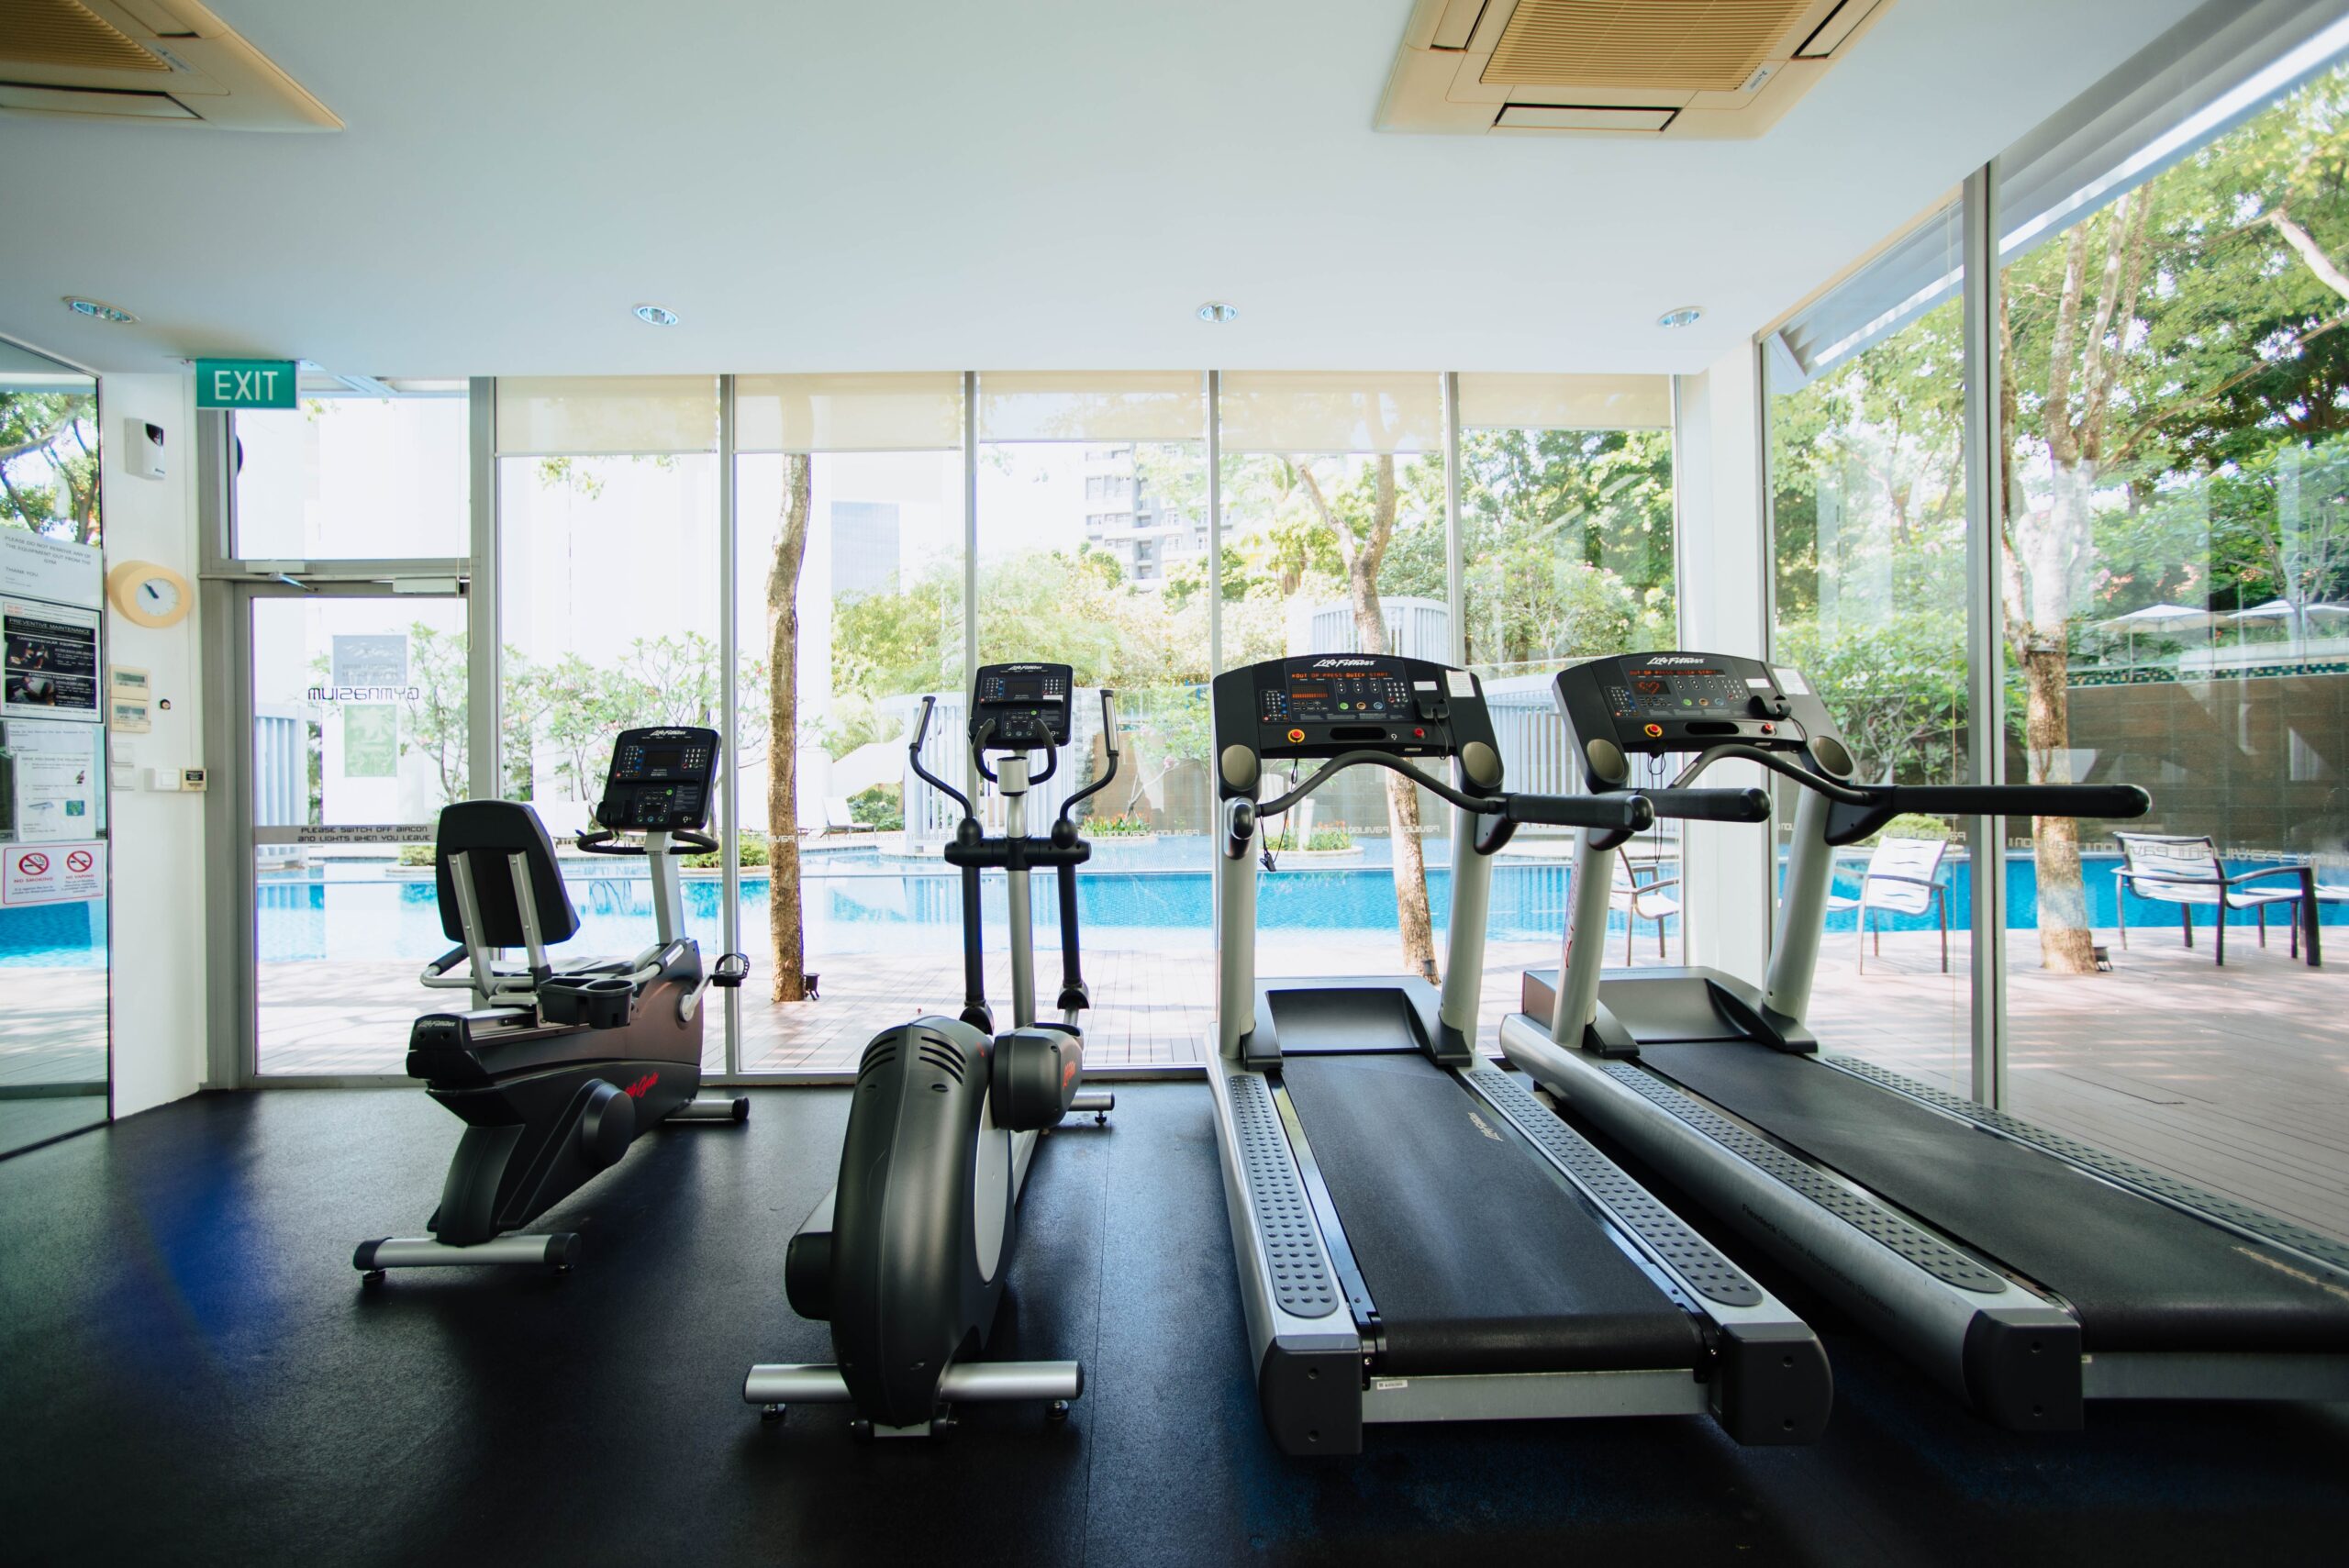 Selecting The Right Treadmill For You